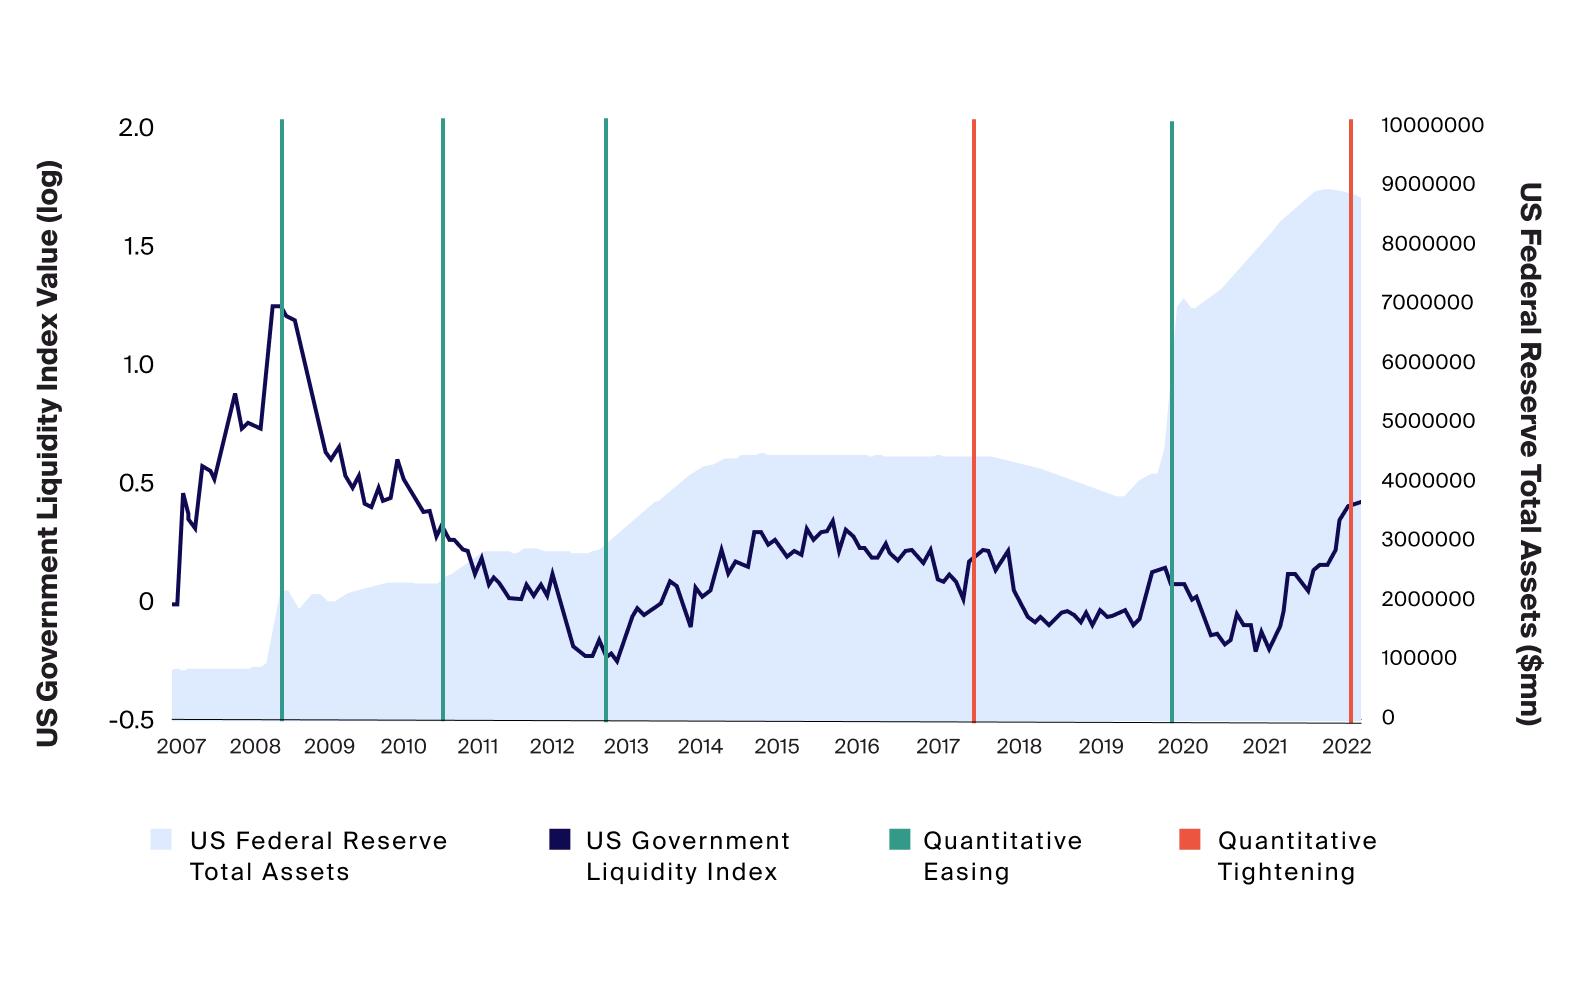 Fed expanded its balance sheet but tightened even as U.S. Gov Liquidity Index climbs, indicating a potential worsening of Treasury market liquidity